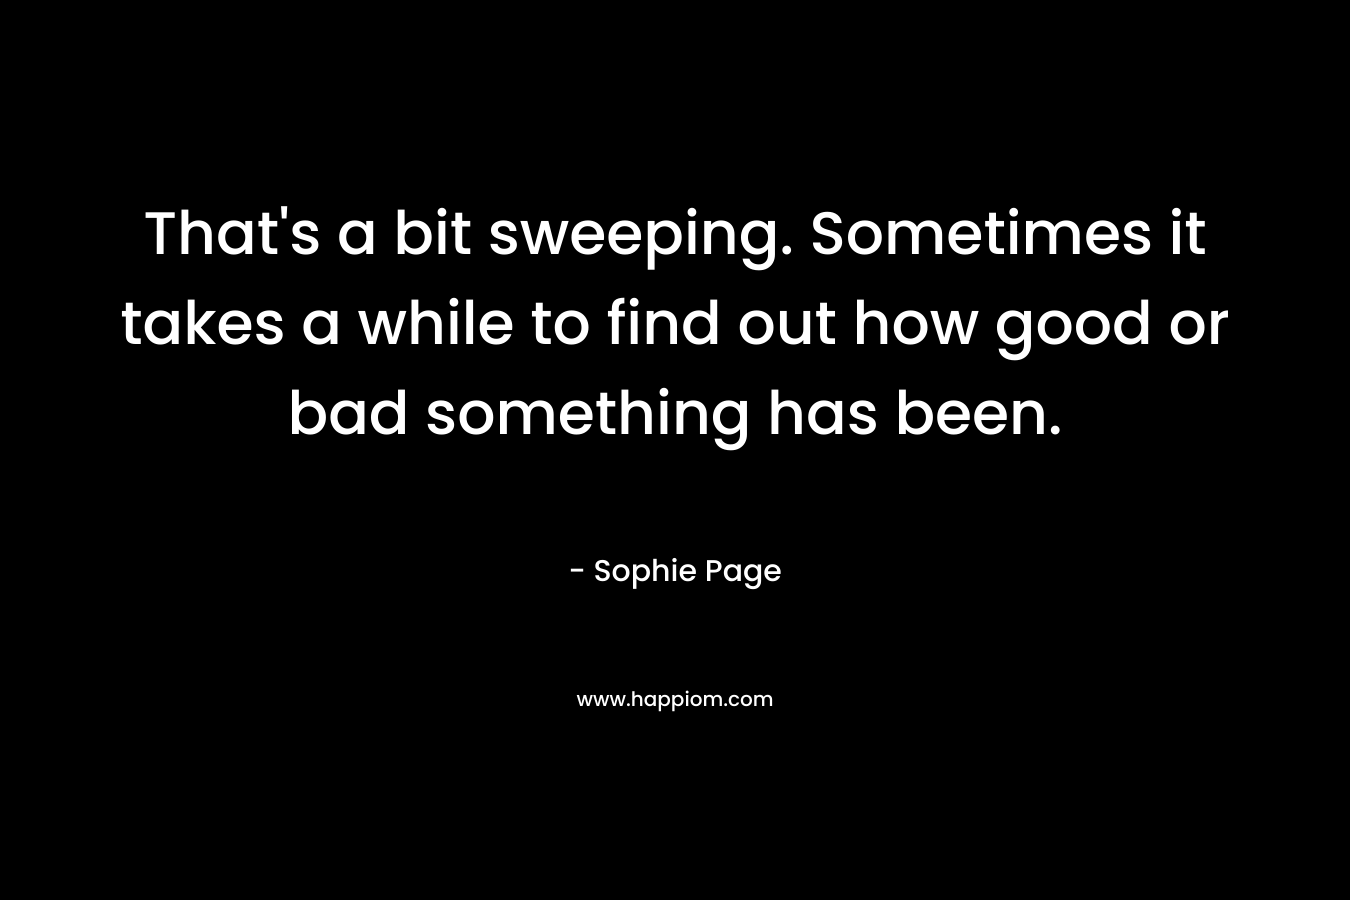 That’s a bit sweeping. Sometimes it takes a while to find out how good or bad something has been. – Sophie Page